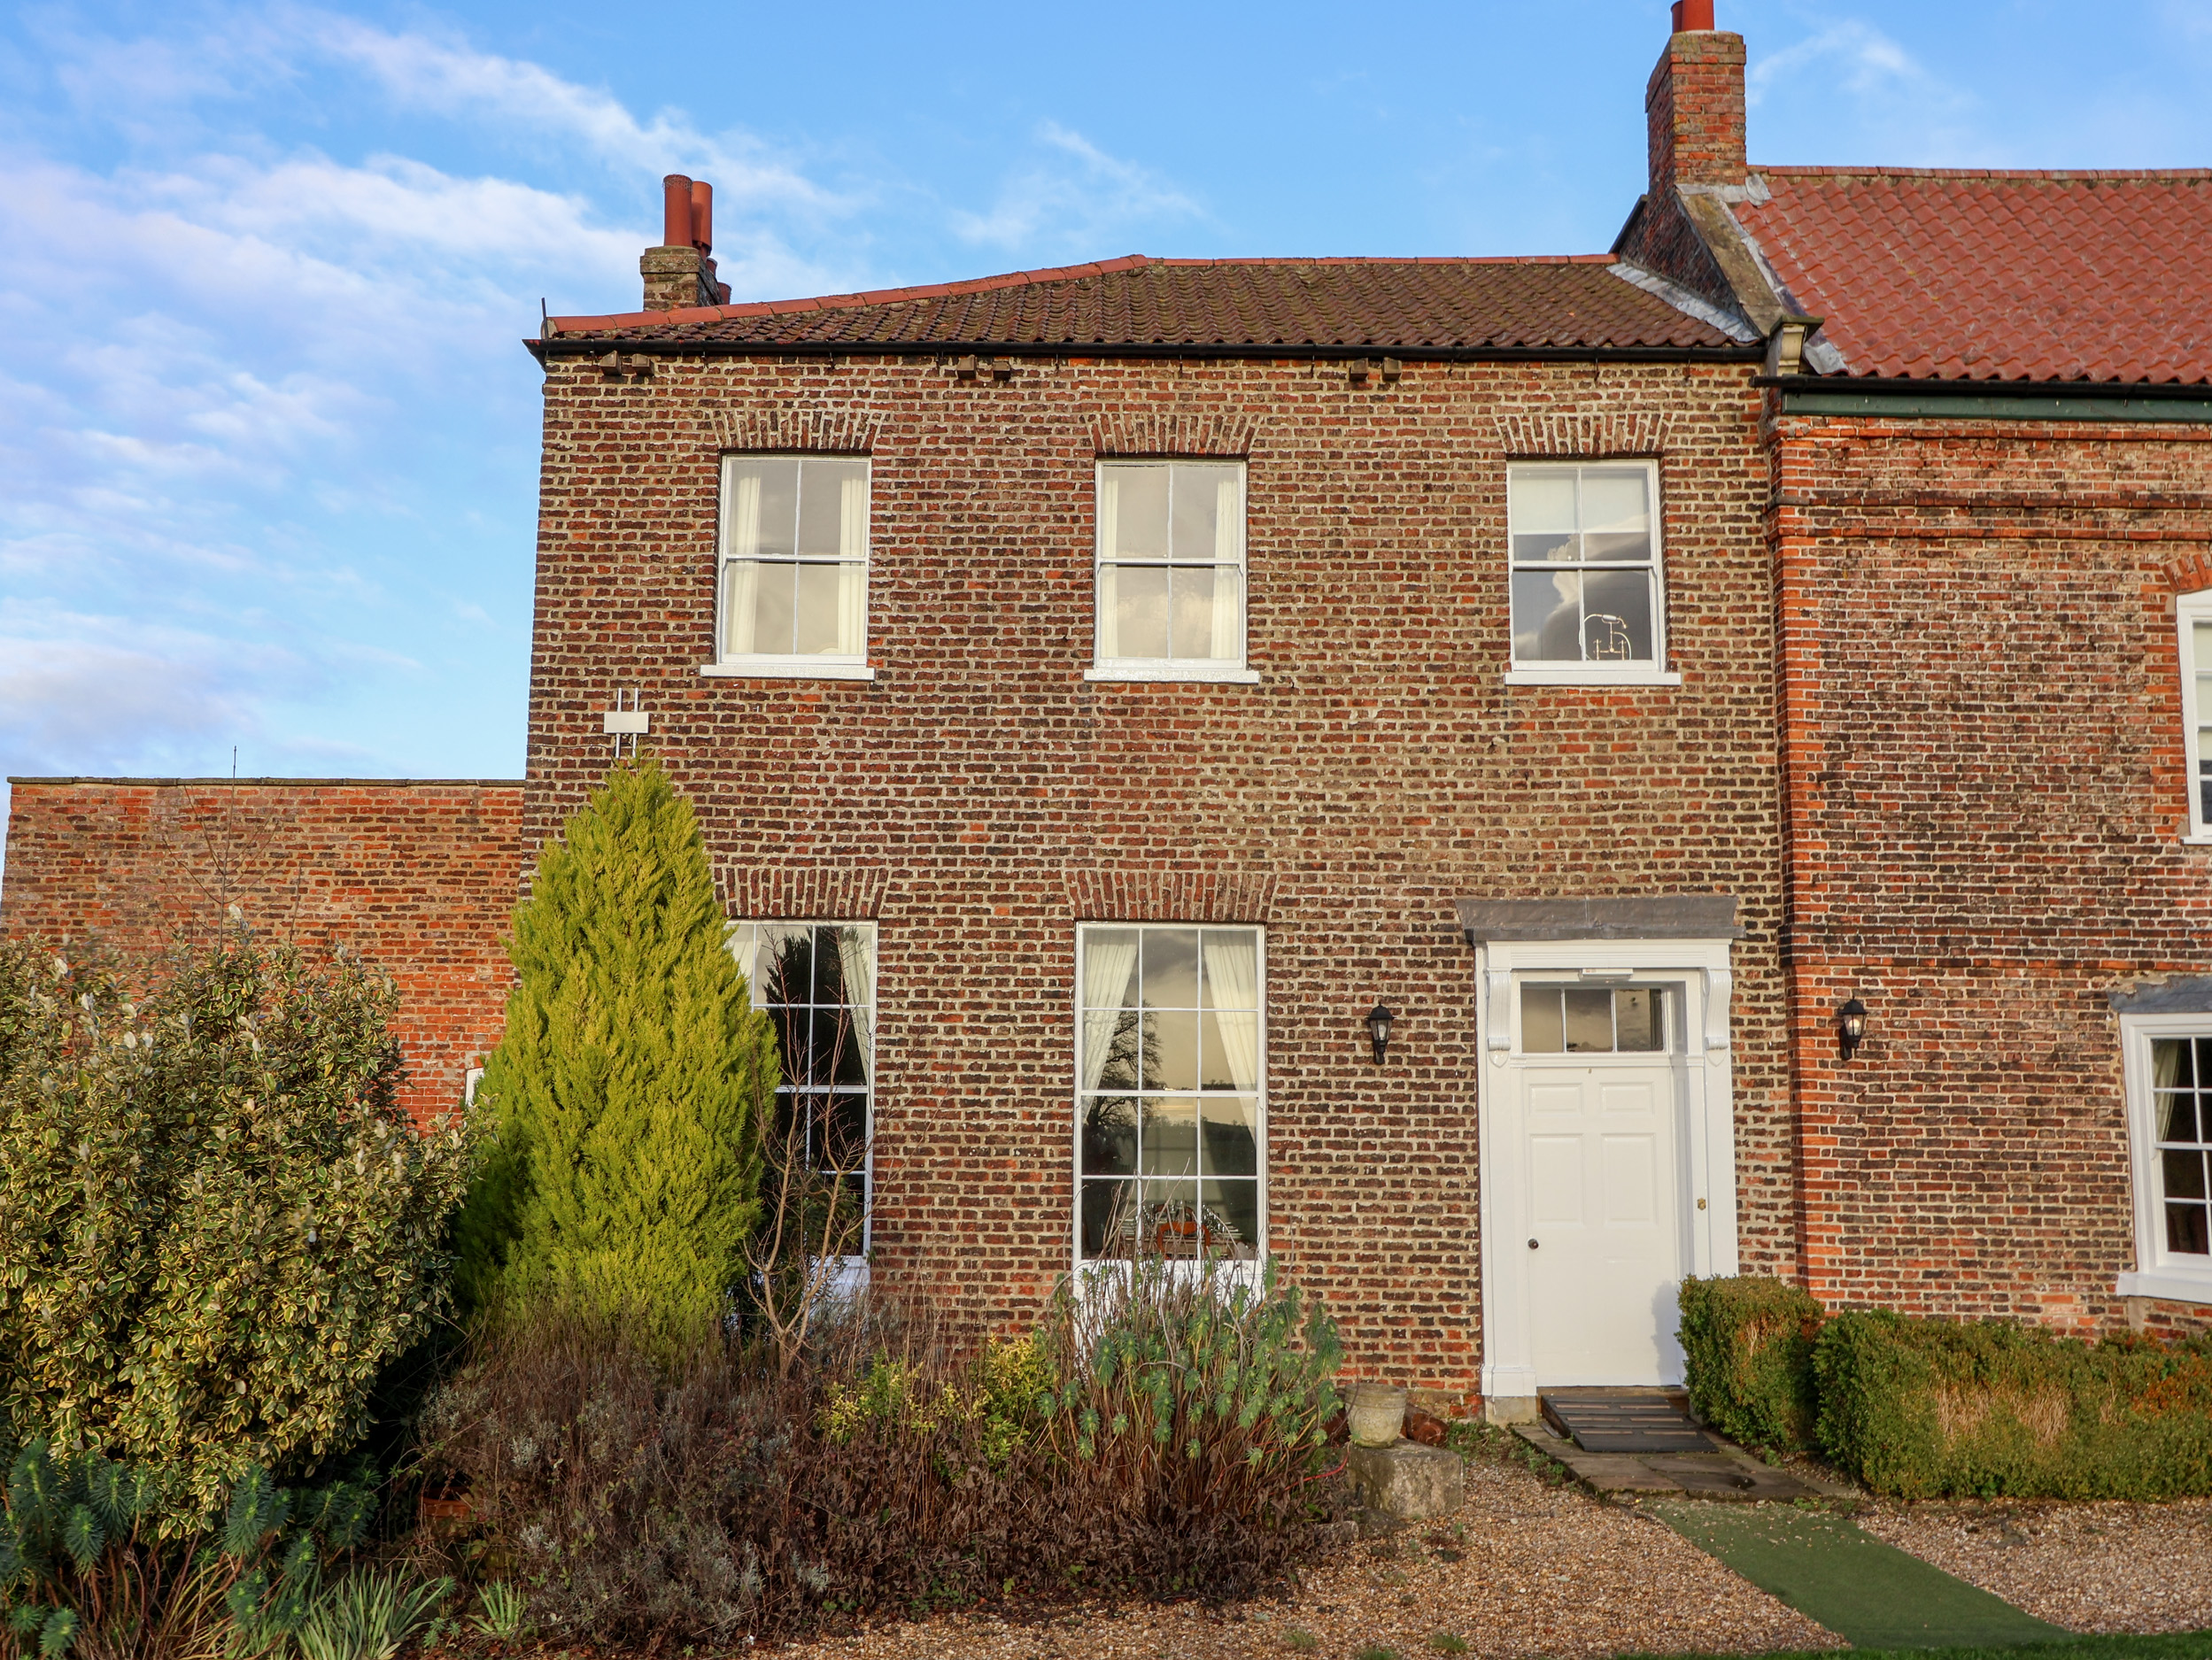 6 bedroom Cottage for rent in Tadcaster